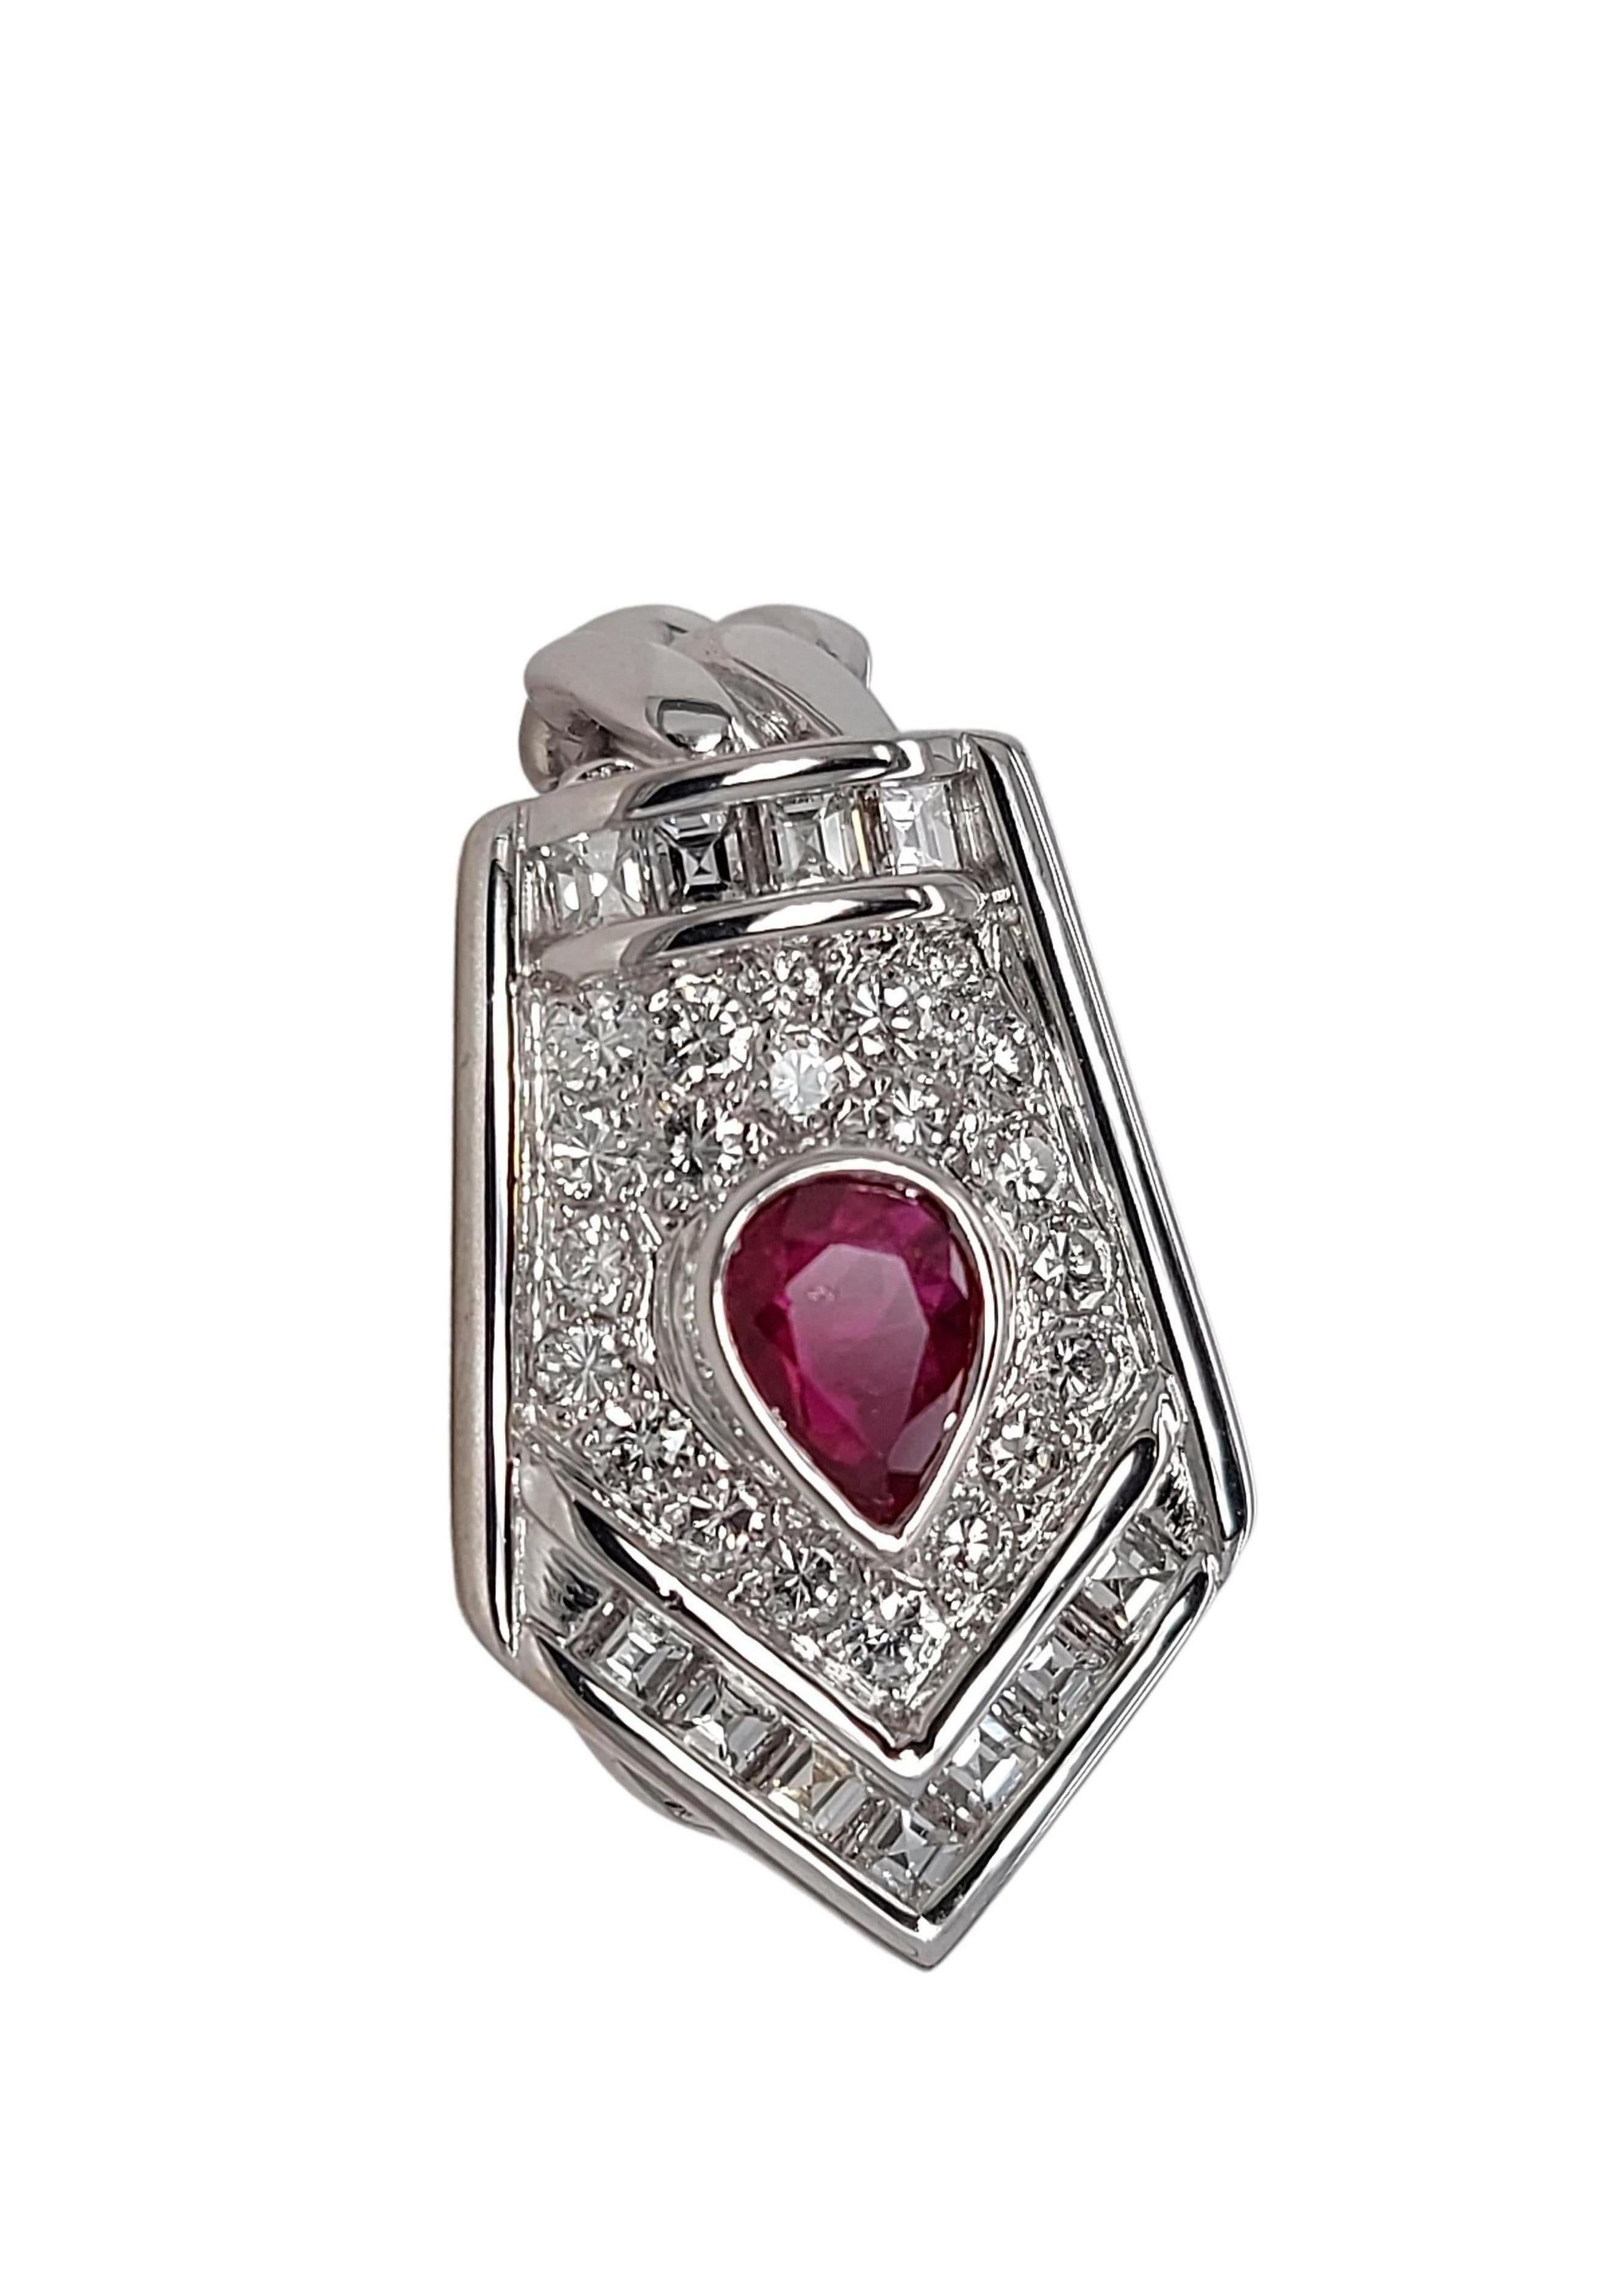 18kt White Gold Clip-On Earrings with Pear Shape Ruby and Diamonds  2